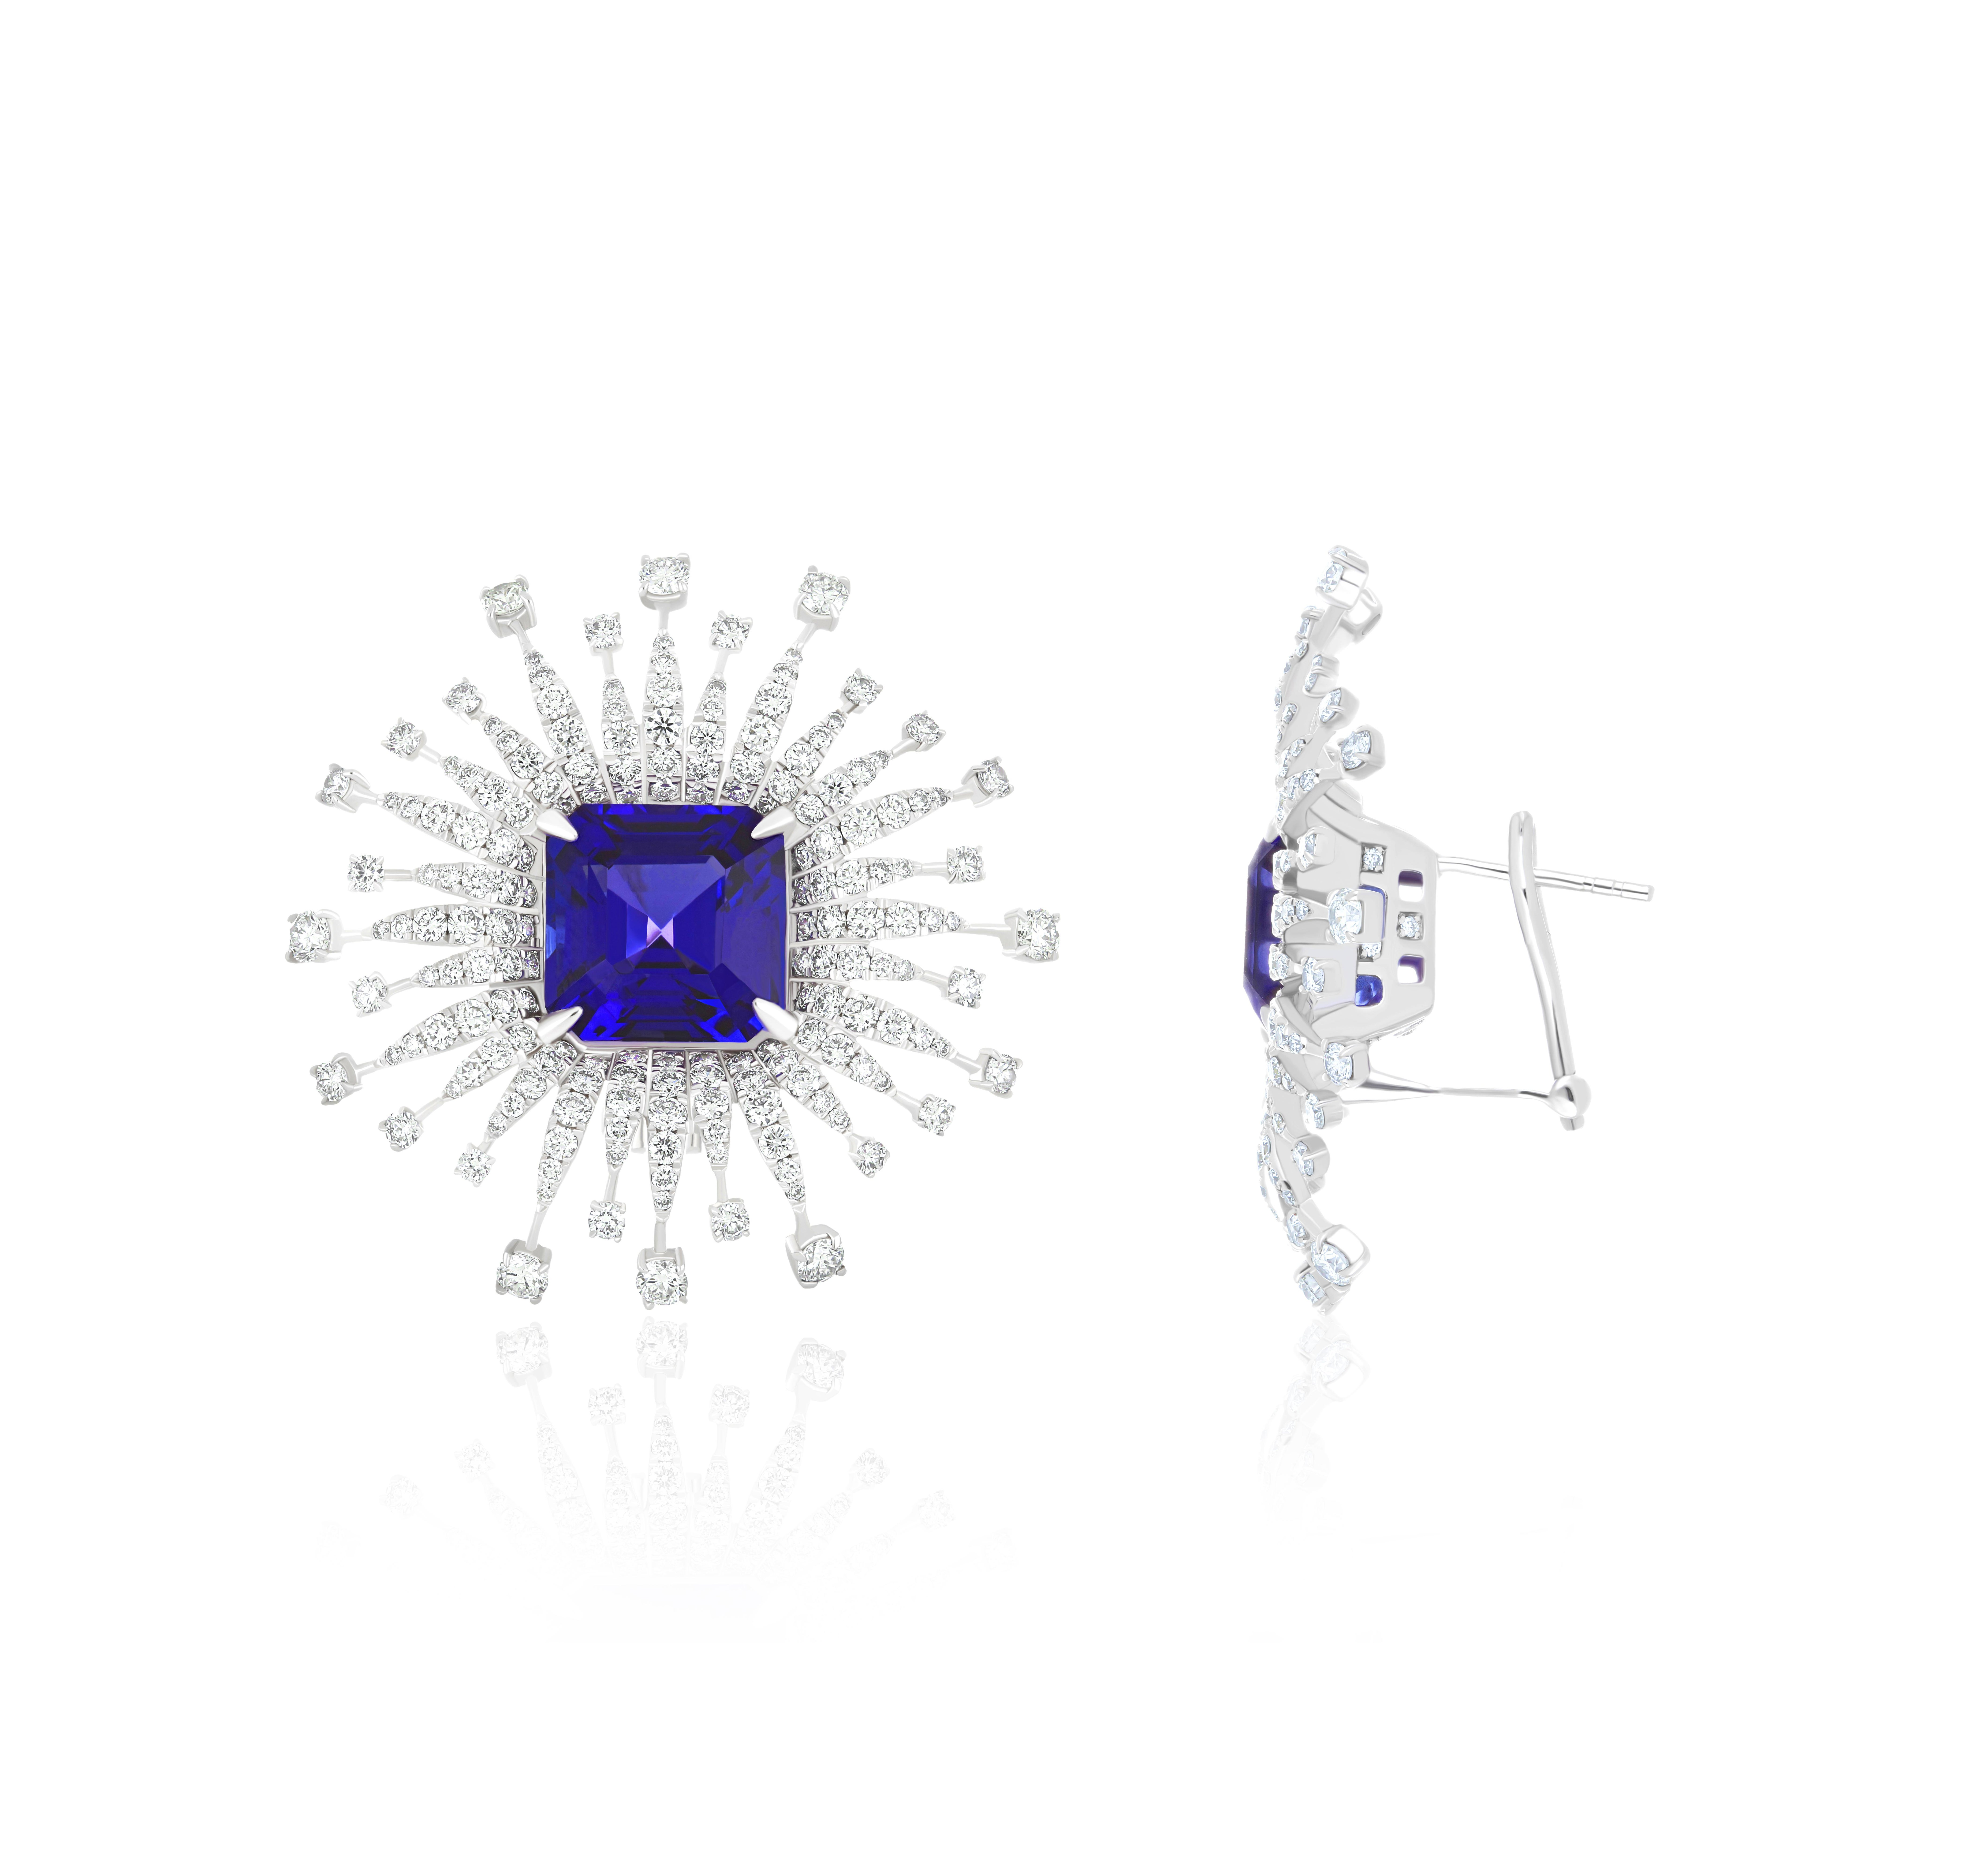 Elegant and Exquisitely detailed White Gold Earring, with 20.00 CT's. (approx.) Tanzanite cut in Octagon  Shape accented with micro pave Diamonds, weighing approx. 5.70 Cts. (approx.). total carat weight. Beautifully Hand-Crafted Earring in 18 Karat